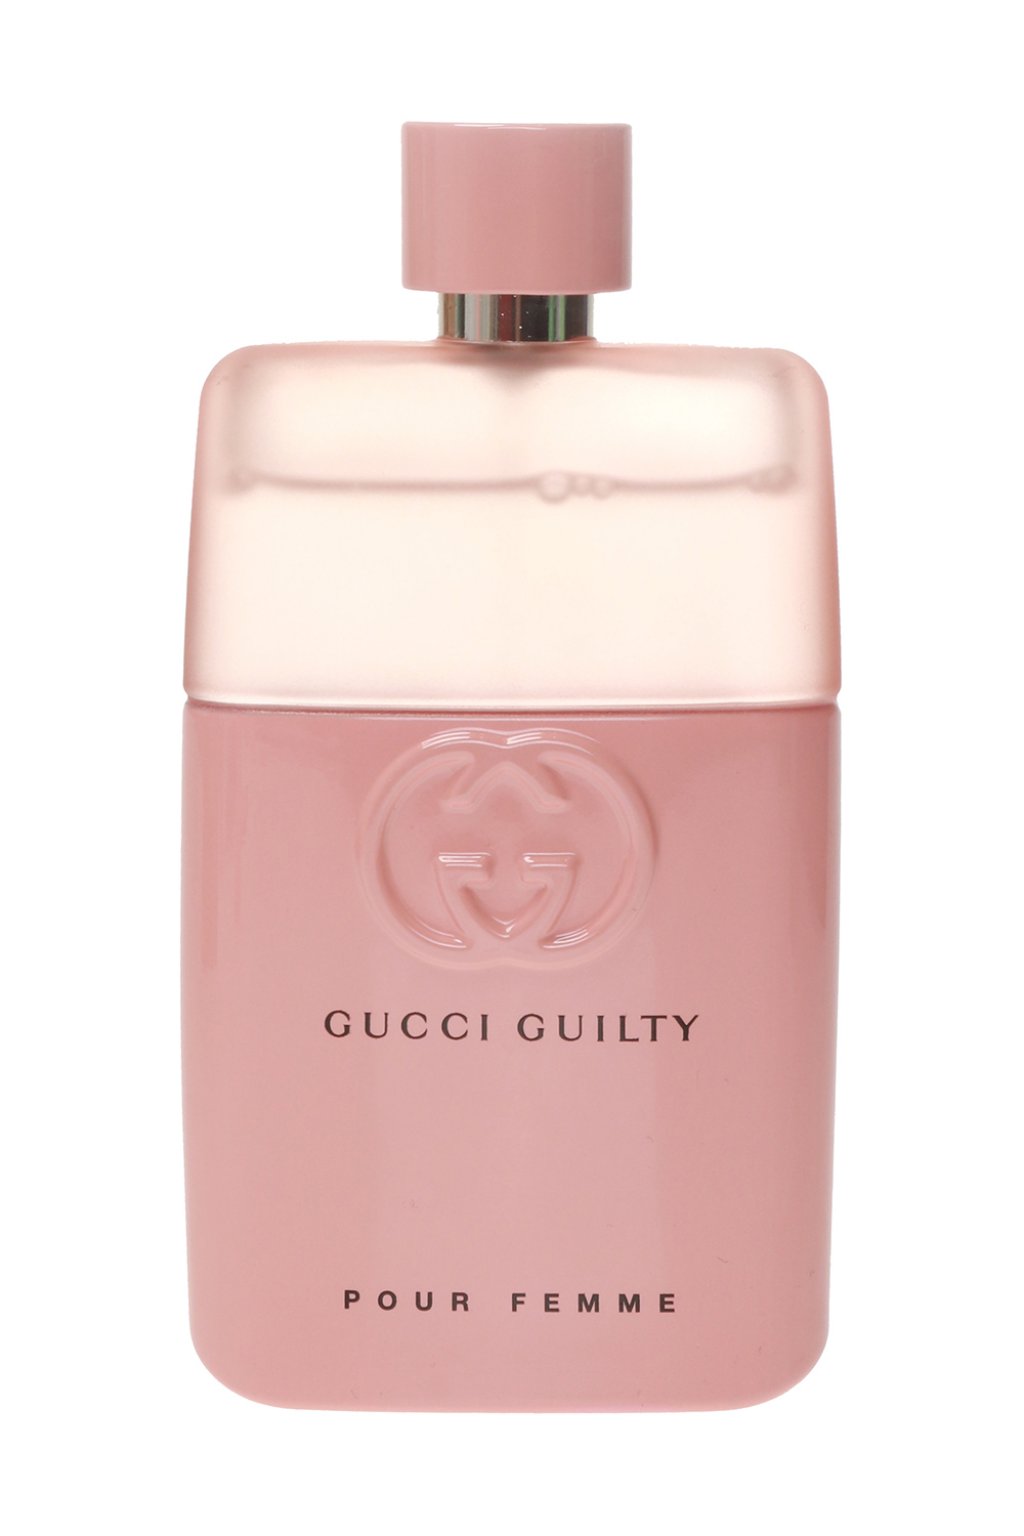 boots gucci guilty perfume